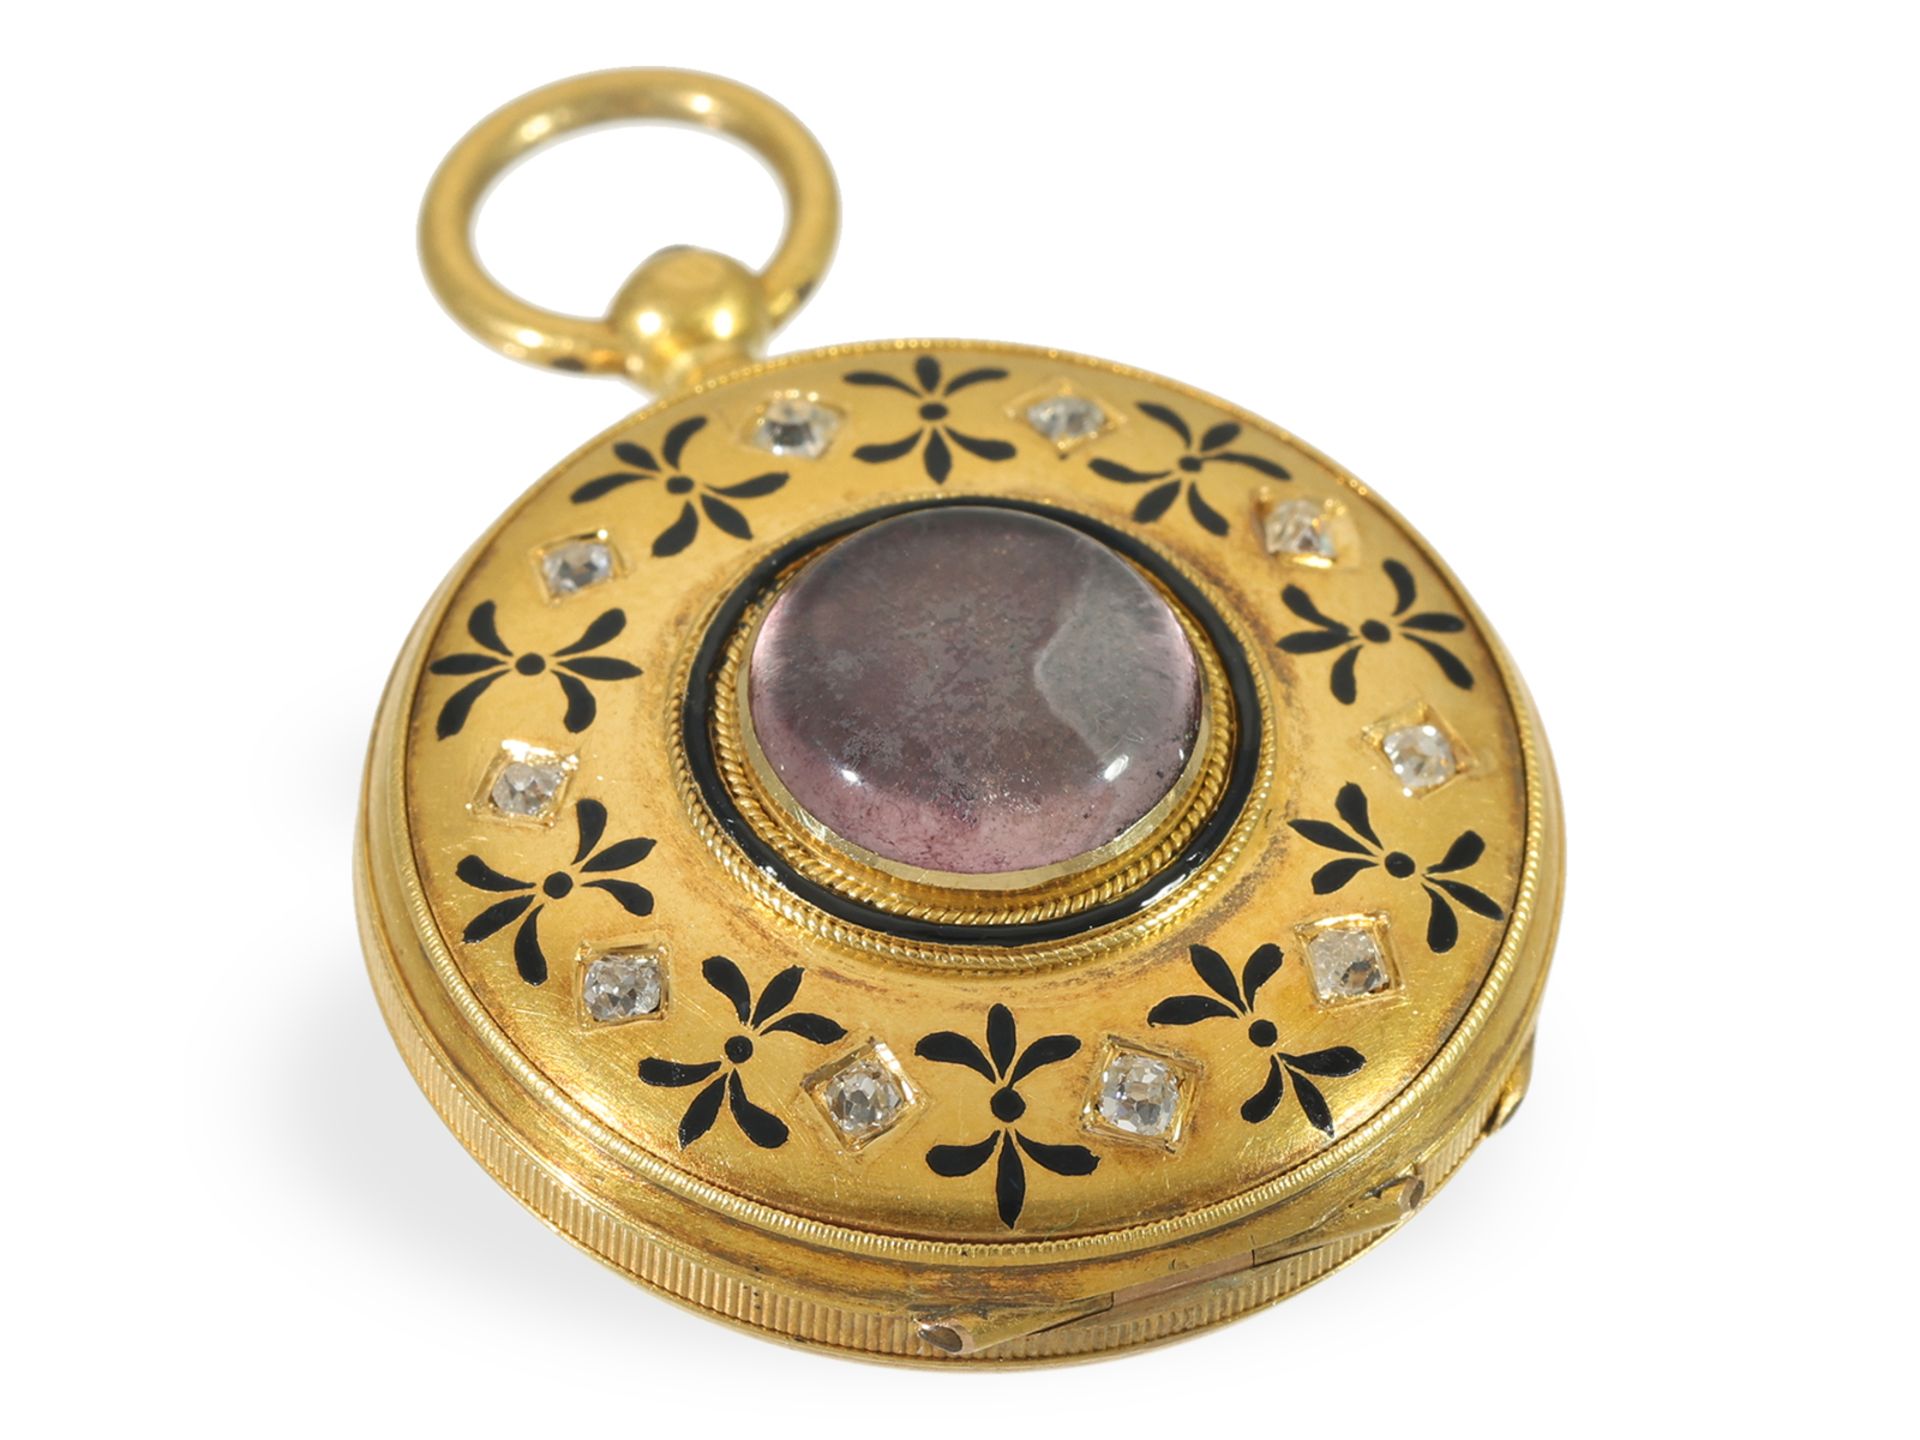 Pendant watch: extremely rare gold/enamel chatelaine watch "Etruscan Revival", Mellerio dits Meller  - Image 4 of 7